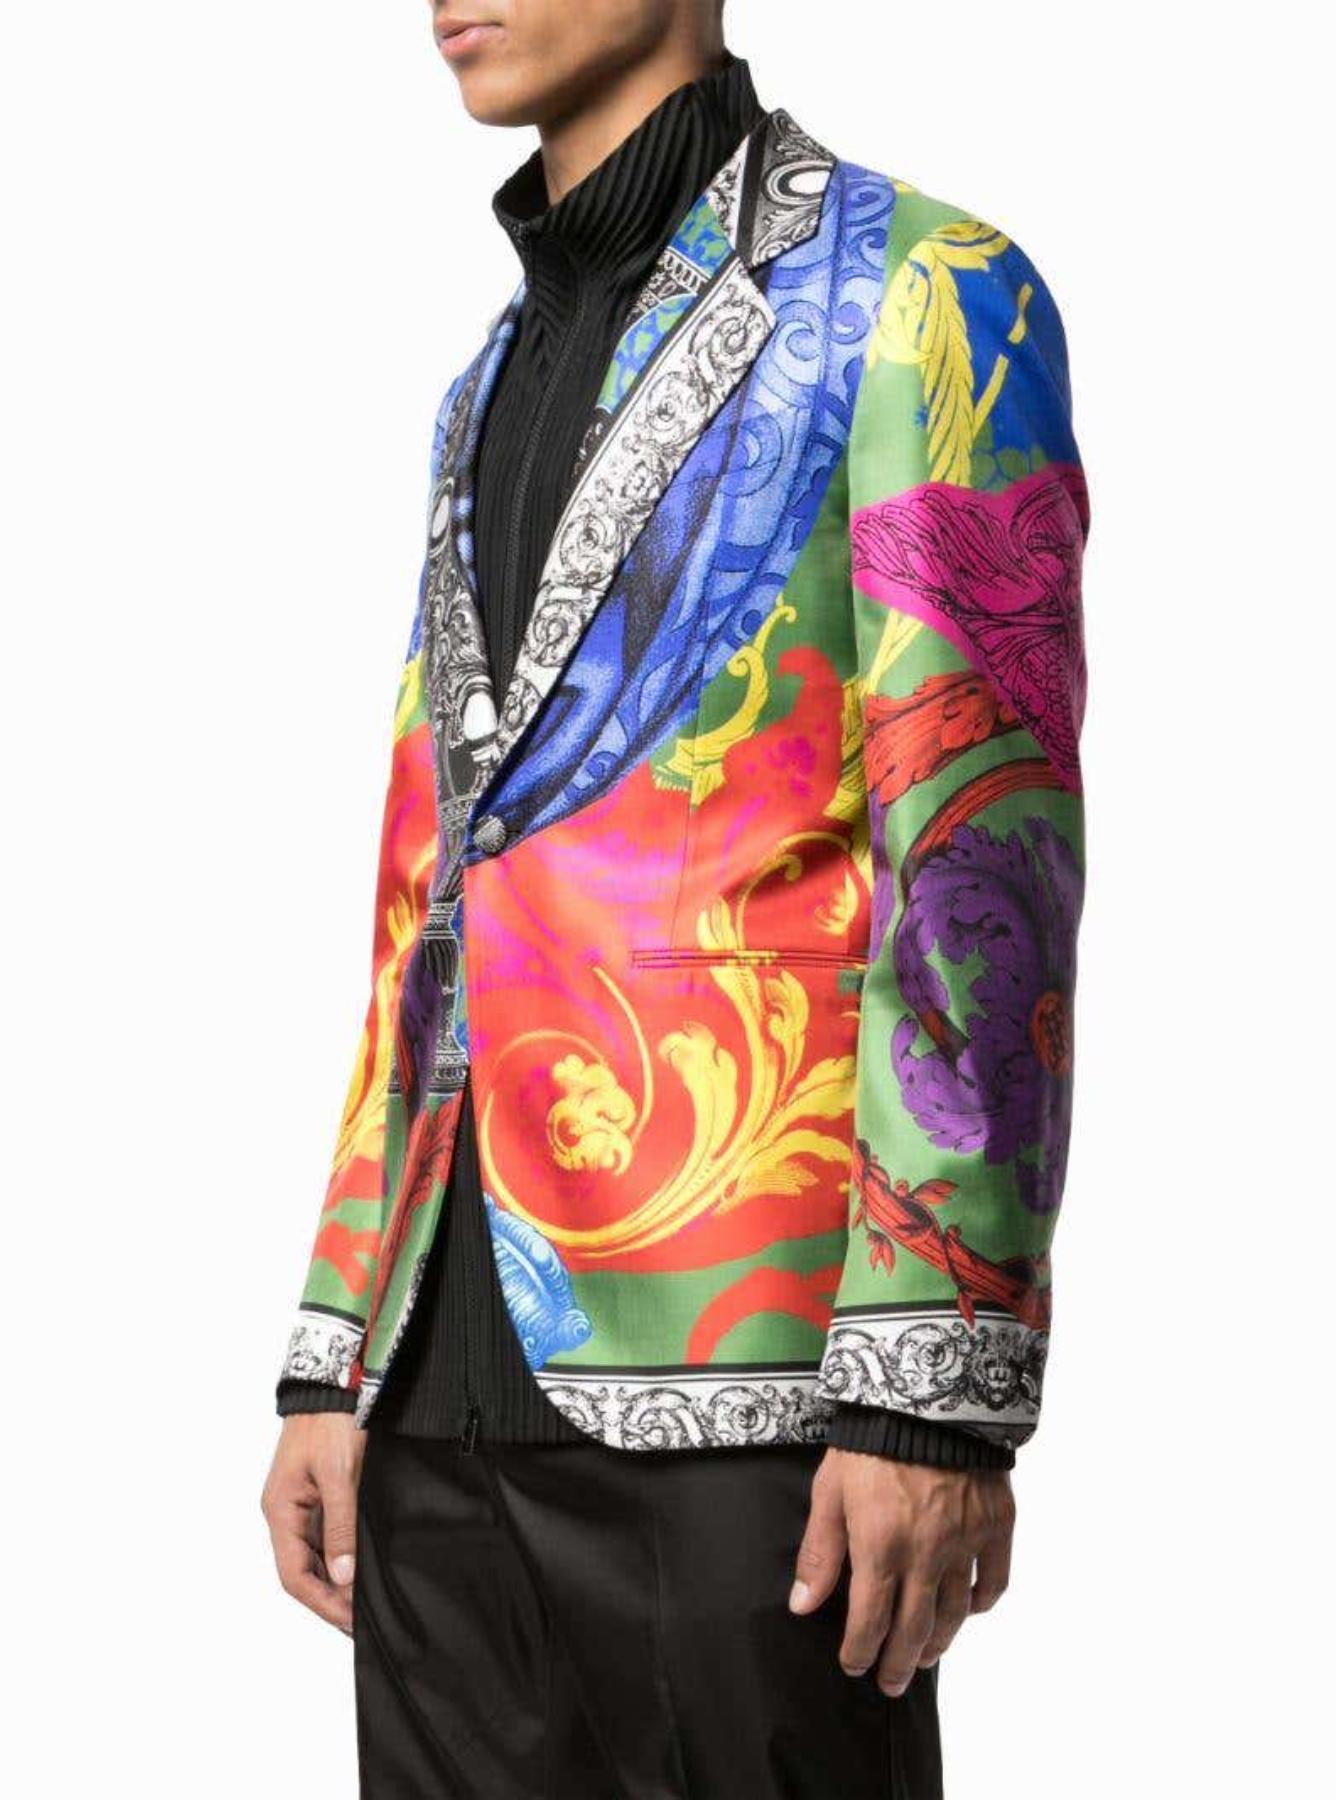 Versace Mens Magna Grecia Multicolor Print Silk Dinner Jacket / Blazer Size 48

Legendary designer and founder Gianni Versace’s groundbreaking vision helped to reshape the fashion industry and secured the brand’s place as a symbol of glamour,